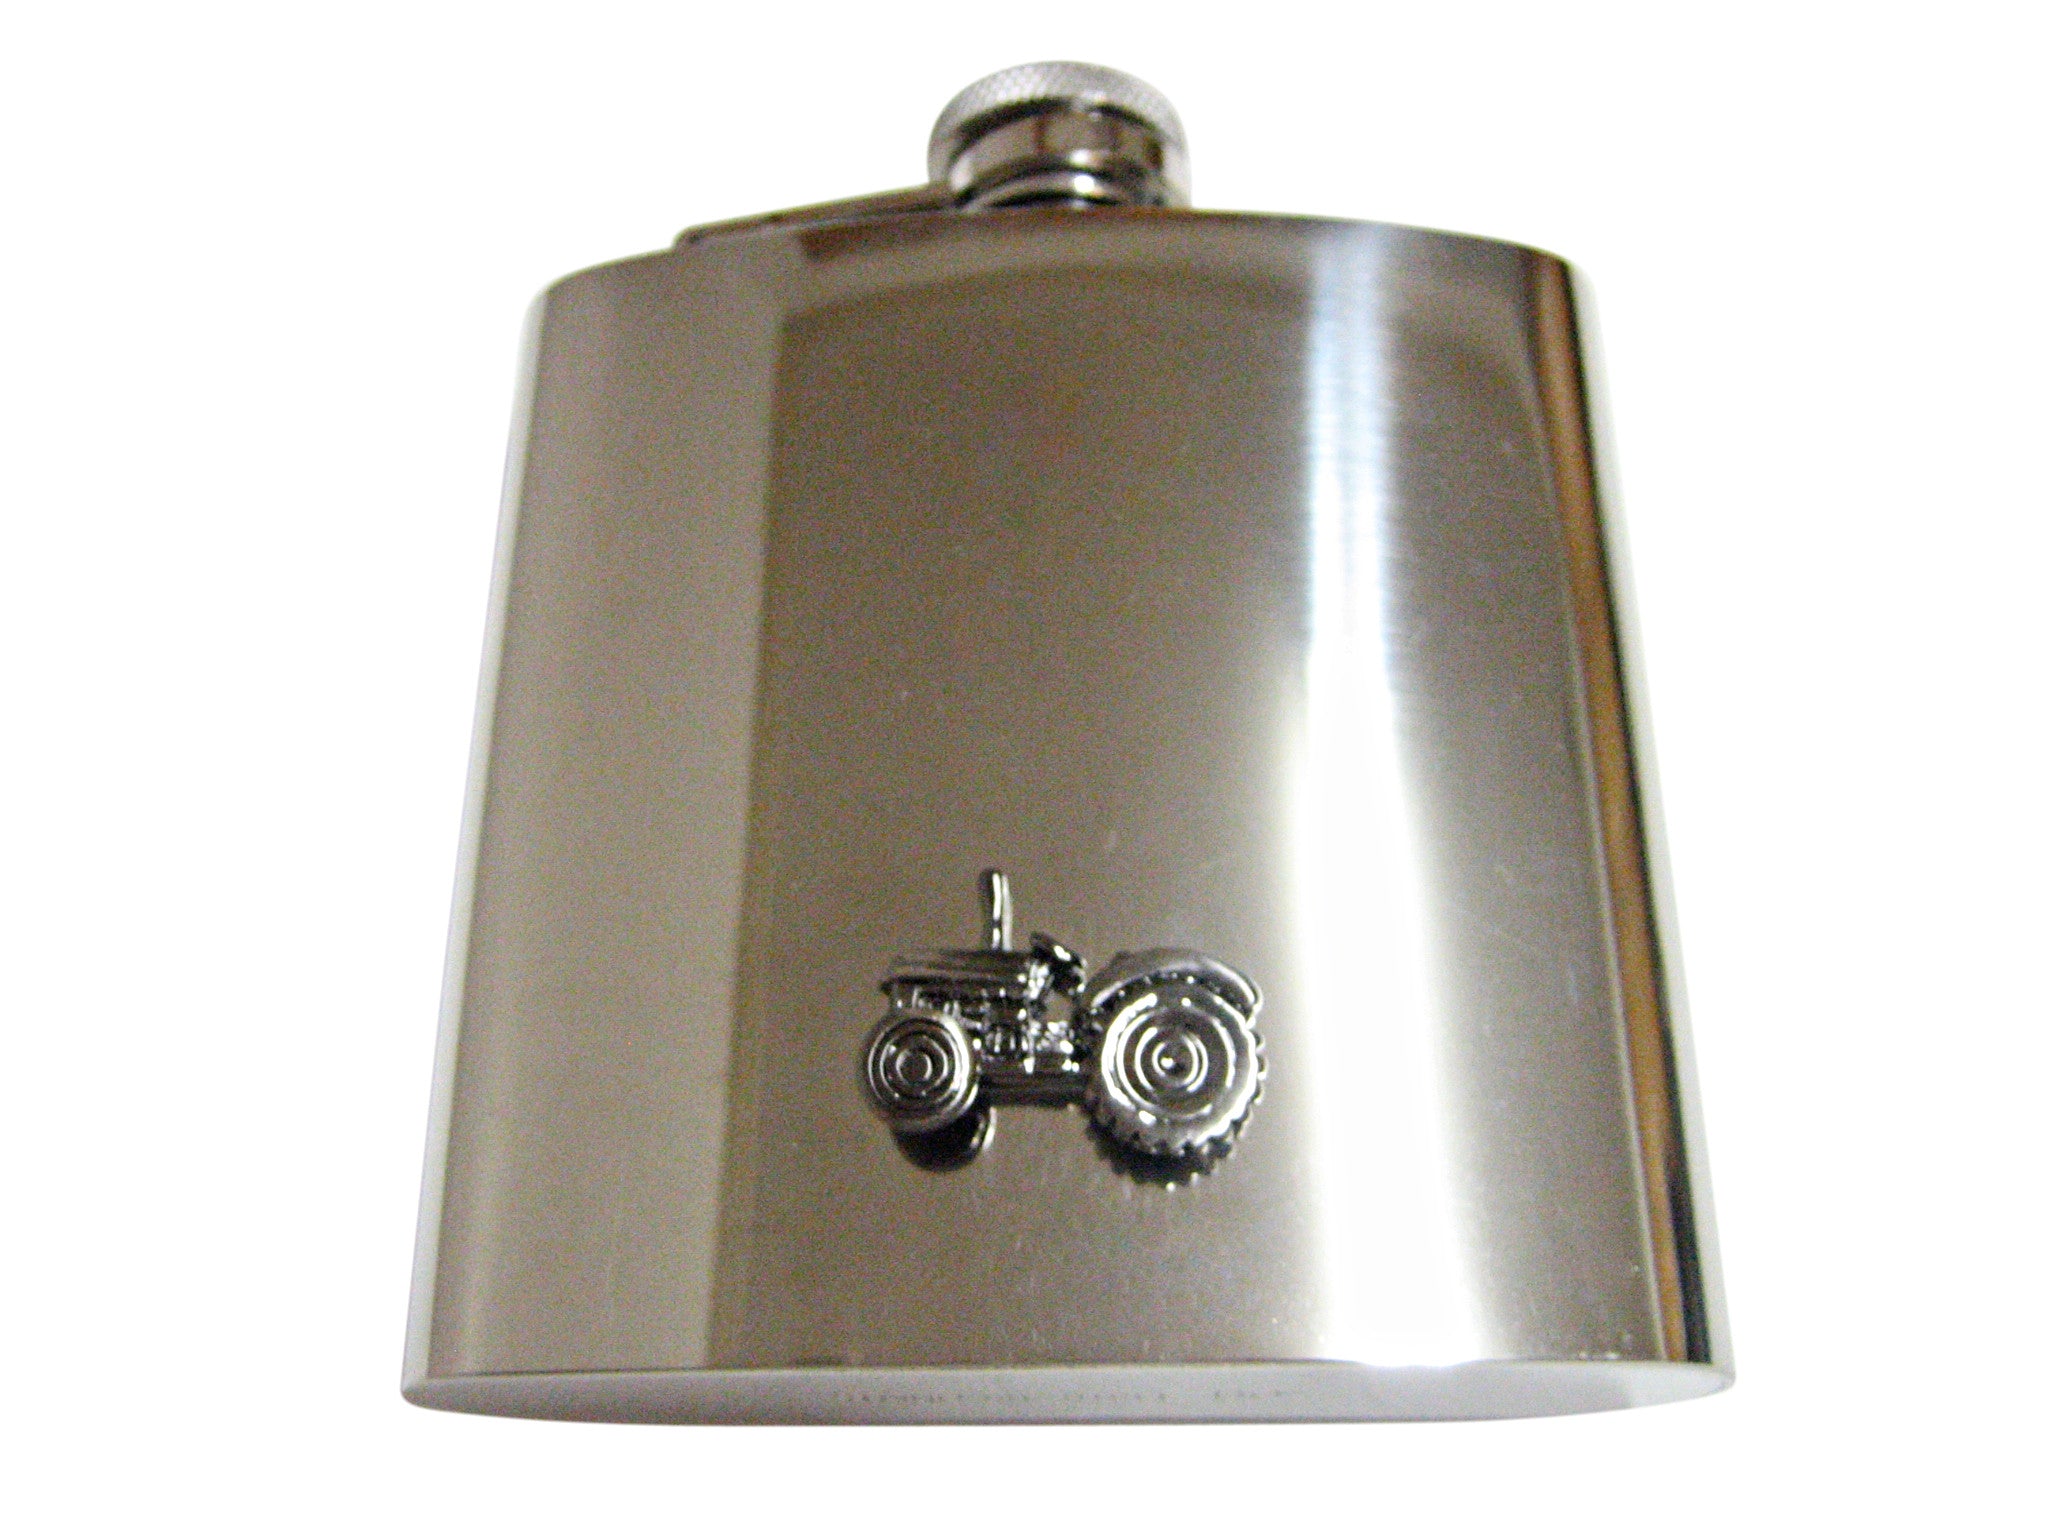 Gunmetal Toned Farm Tractor 6 Oz. Stainless Steel Flask